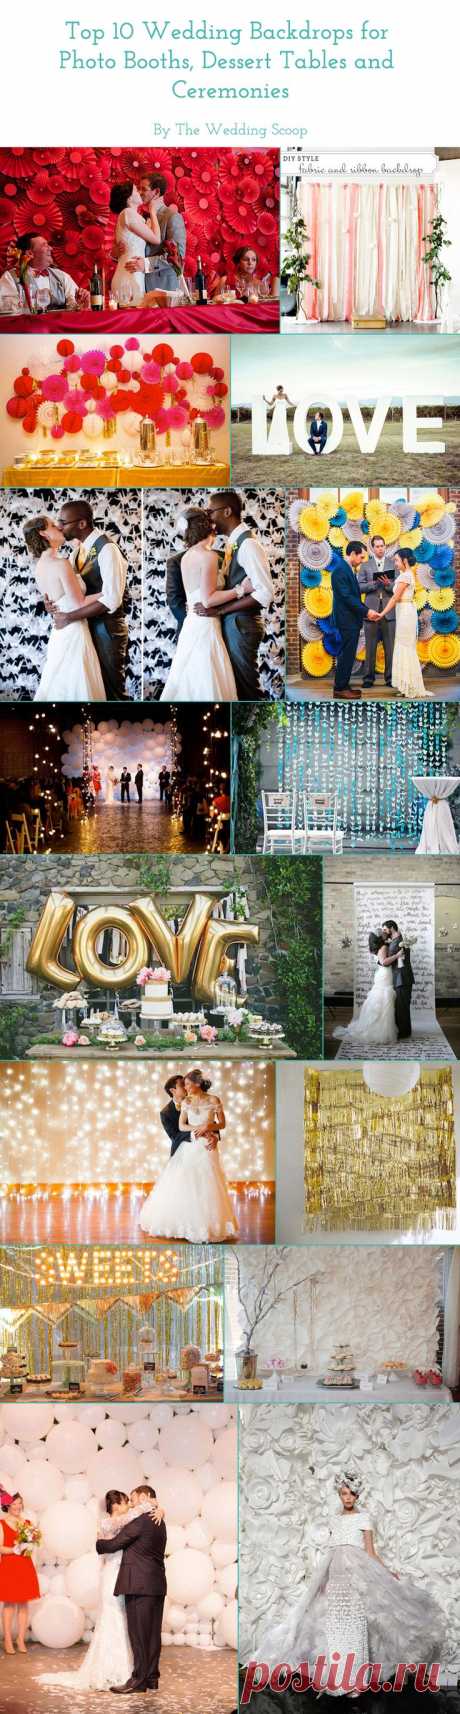 Top 10 Wedding Backdrops for Photo Booths, Dessert Tables and Ceremonies